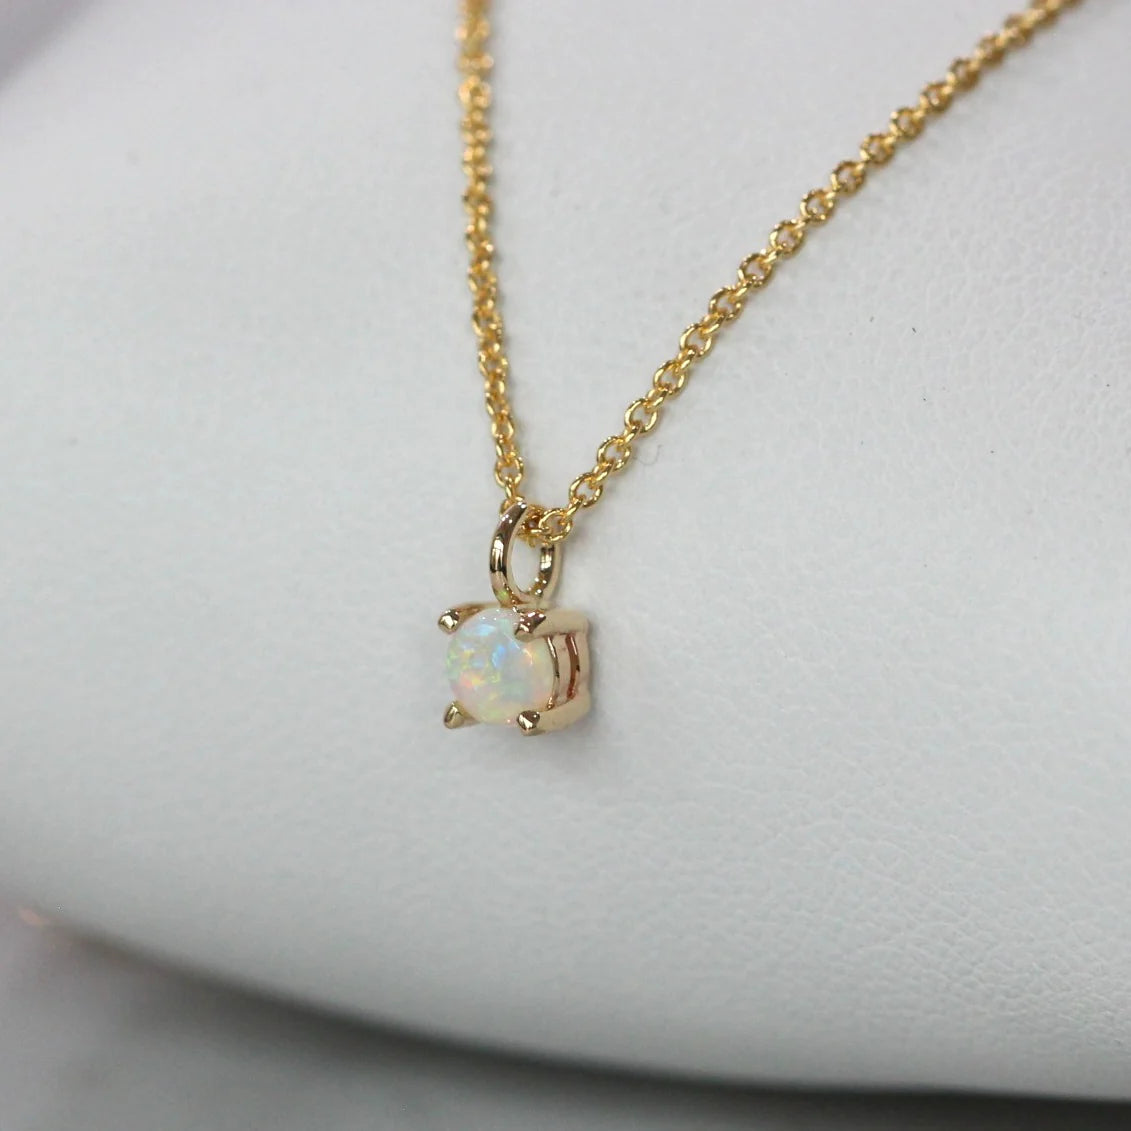 Children's and Teens' Necklaces:  18k Gold over Sterling Silver 40cm+ Opal Necklaces